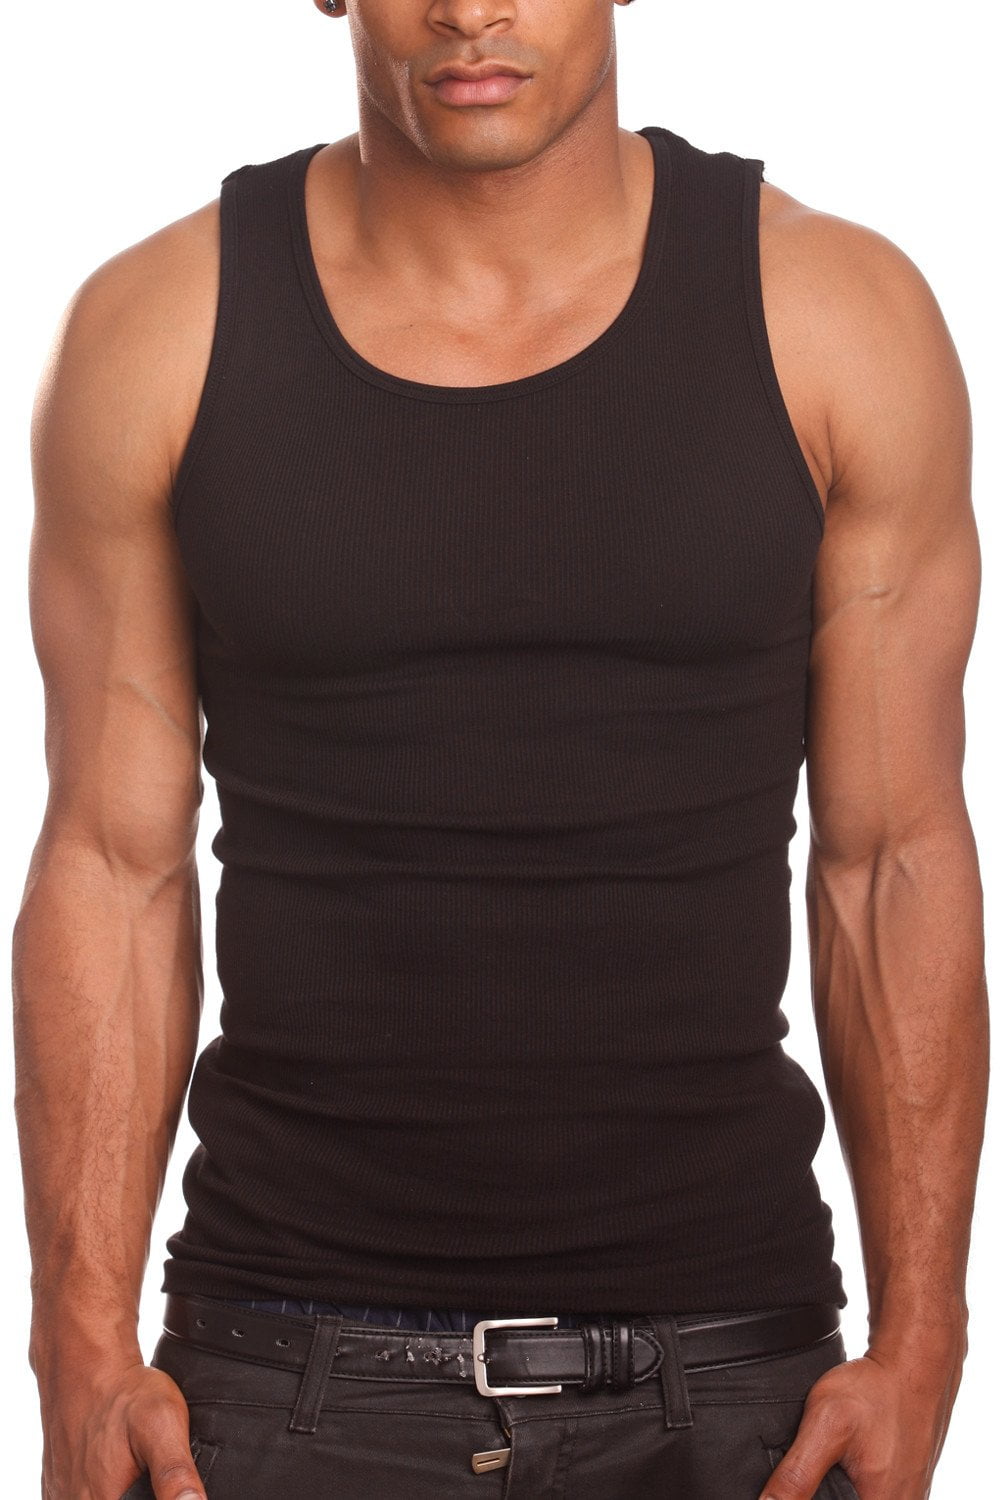 Value Packs of Men's Black & White Ribbed 100% Cotton Tank Top A Shirts  Undershirt (M, 3 Pack White)